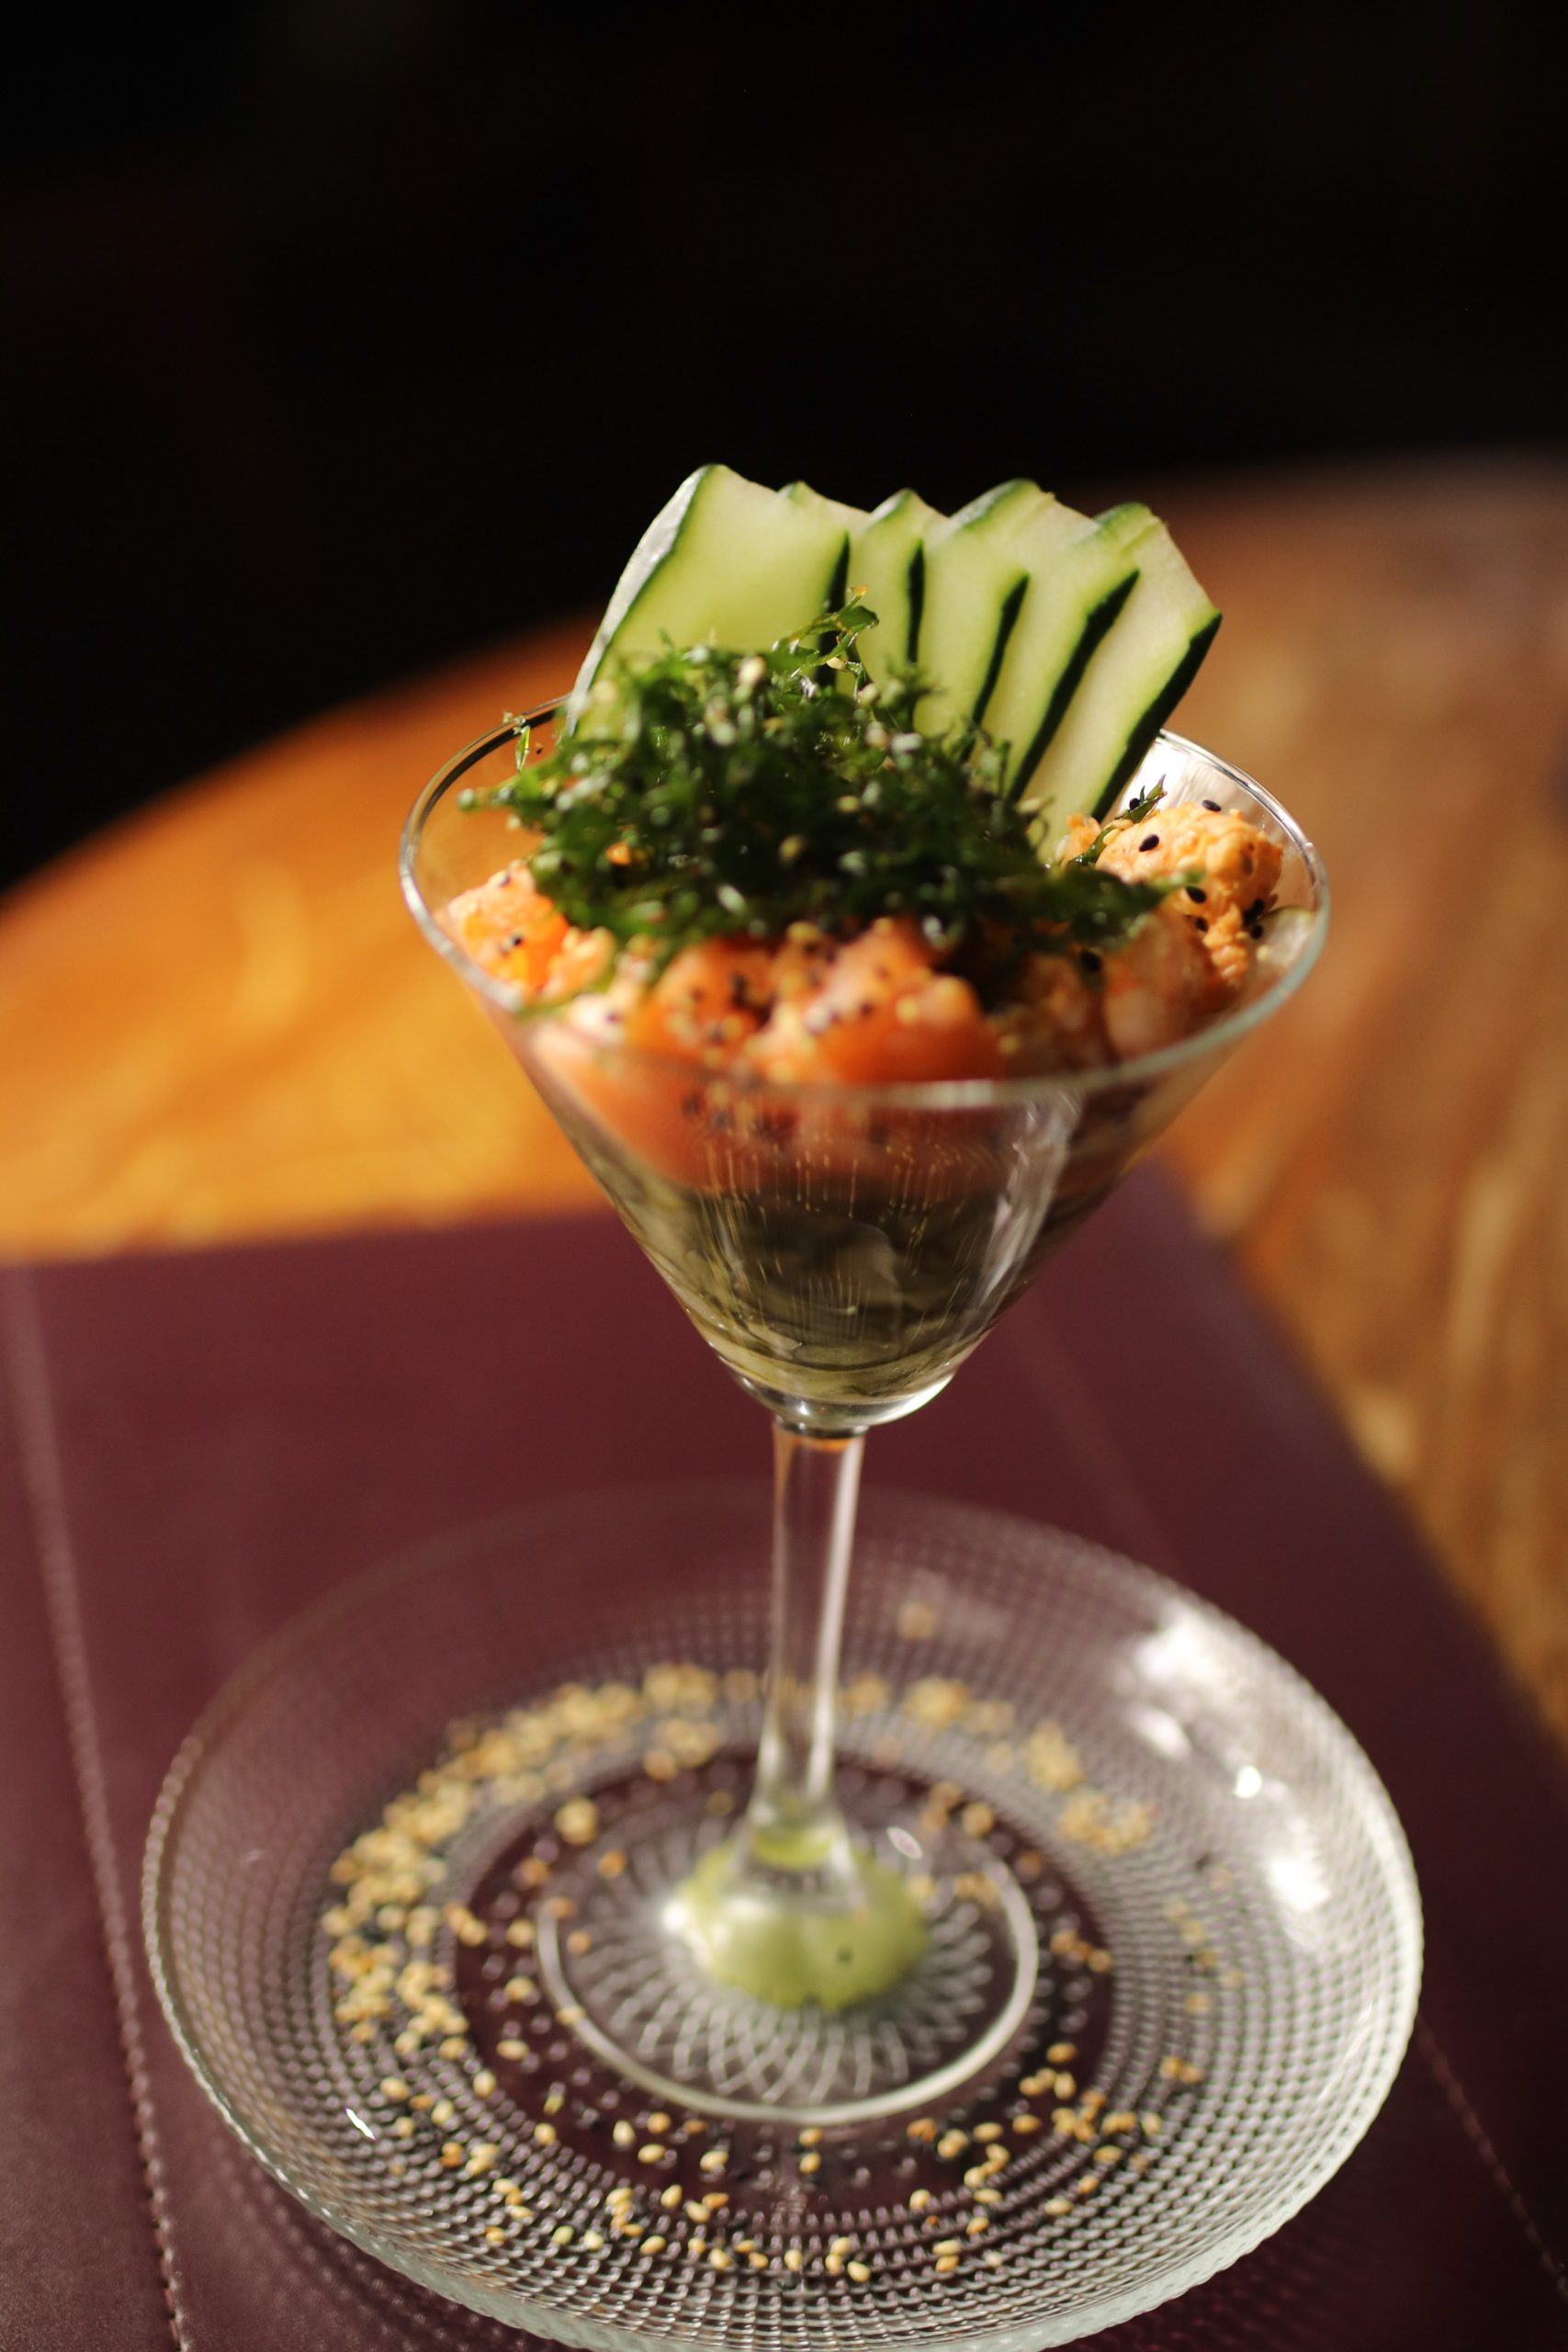 Place photo on the subheading a shrimp cocktail serve in a cocktail glass